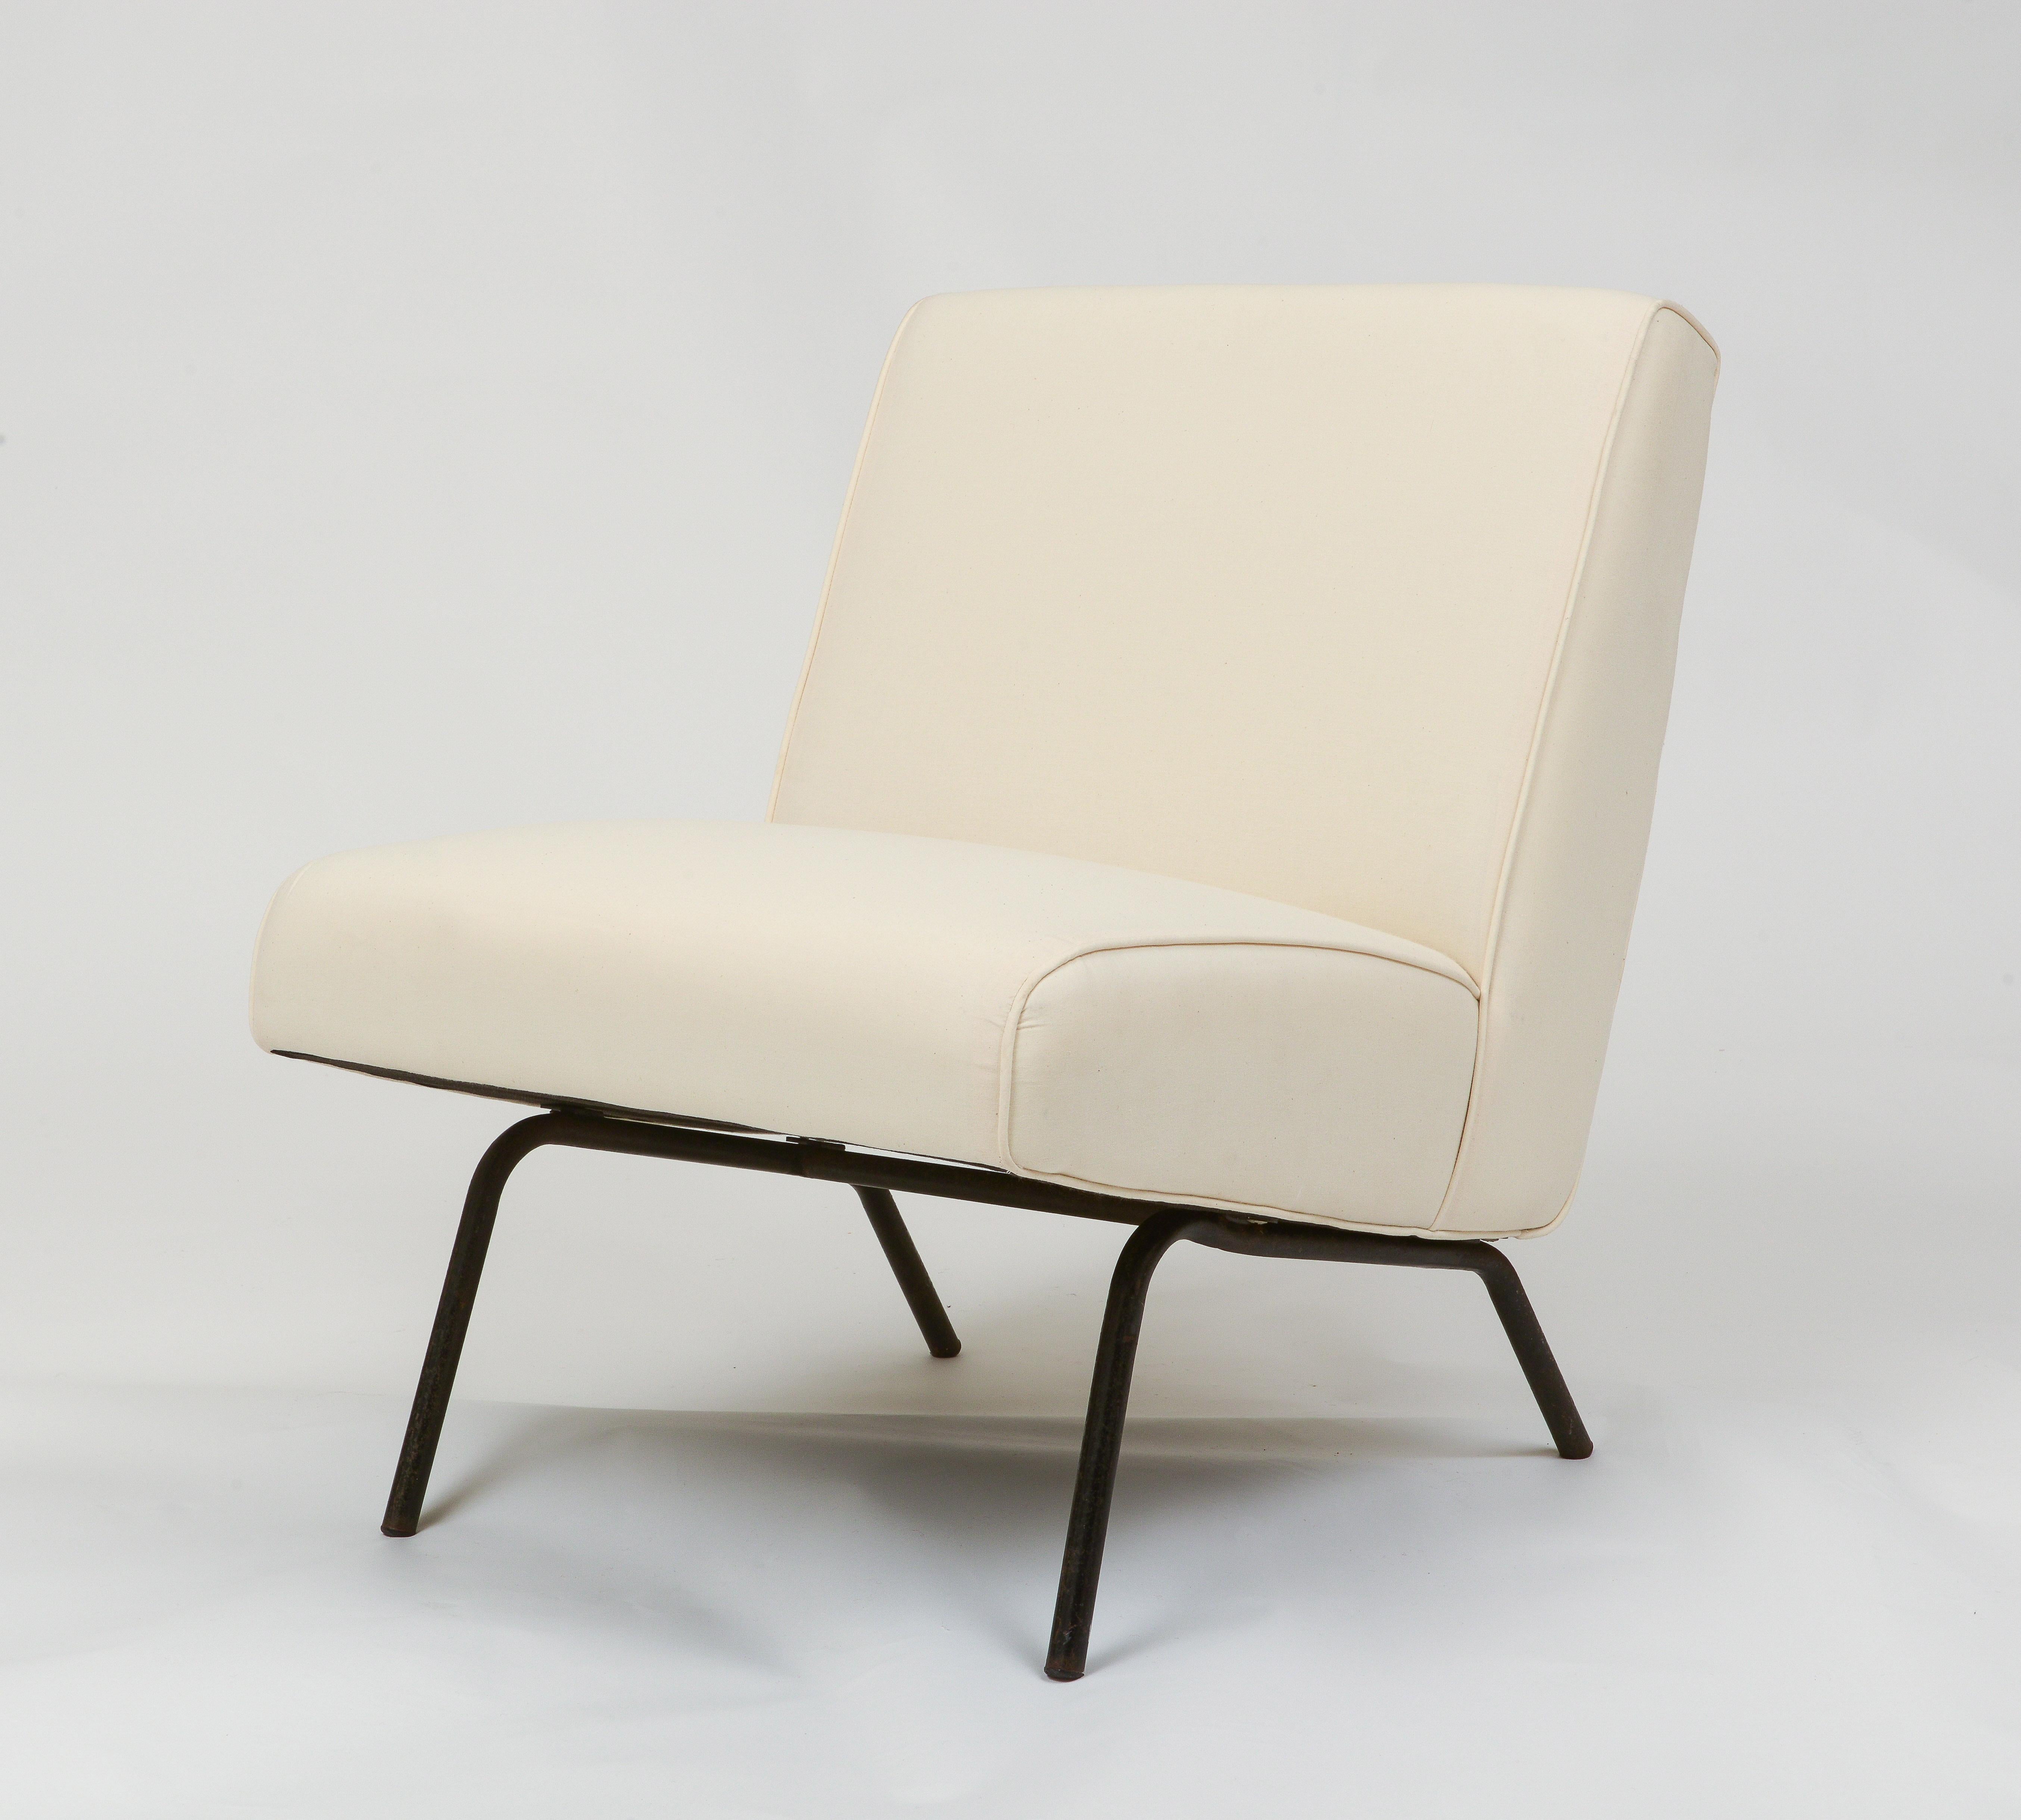 Joseph Andre Motte pair white chairs with iron legs, France 1960
Beautiful and elegant pair of chairs. Chic and sophisticate. Trademark legs of Joseph Andre Motte. One of the premier designers of the modern French movement. Comfortable and stable.